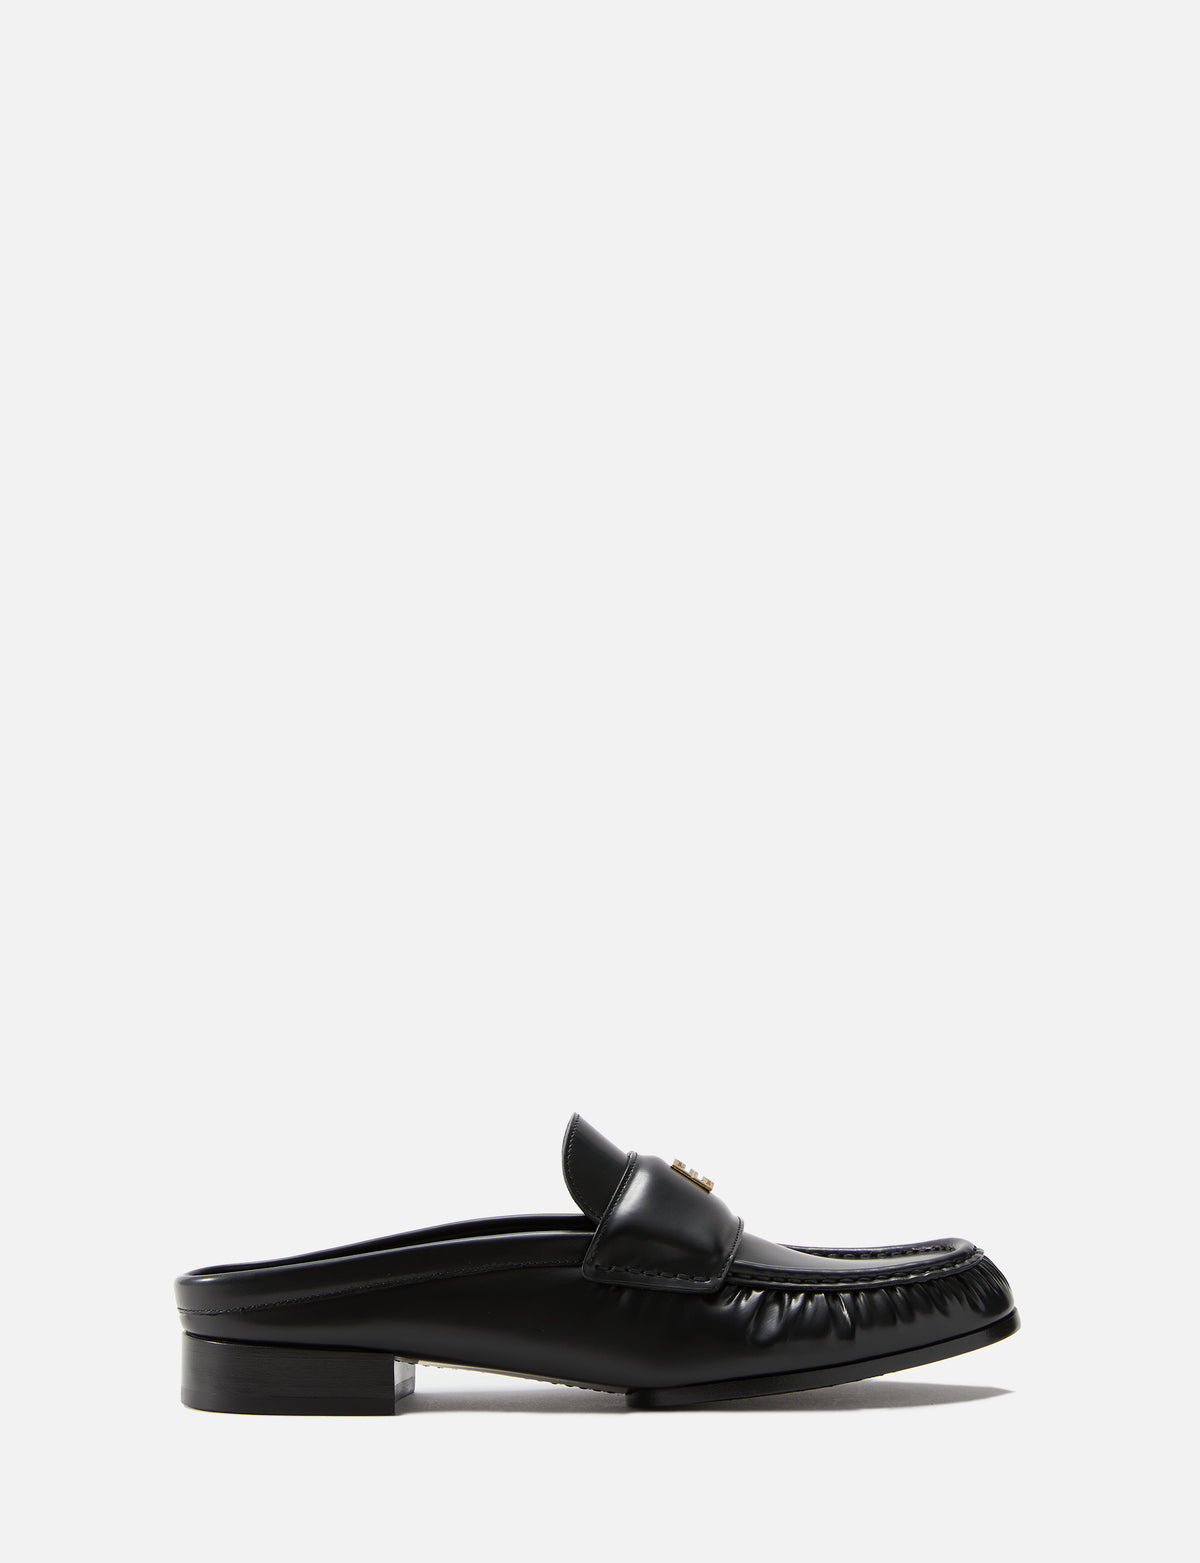 view 1 - 4G Loafer Mule